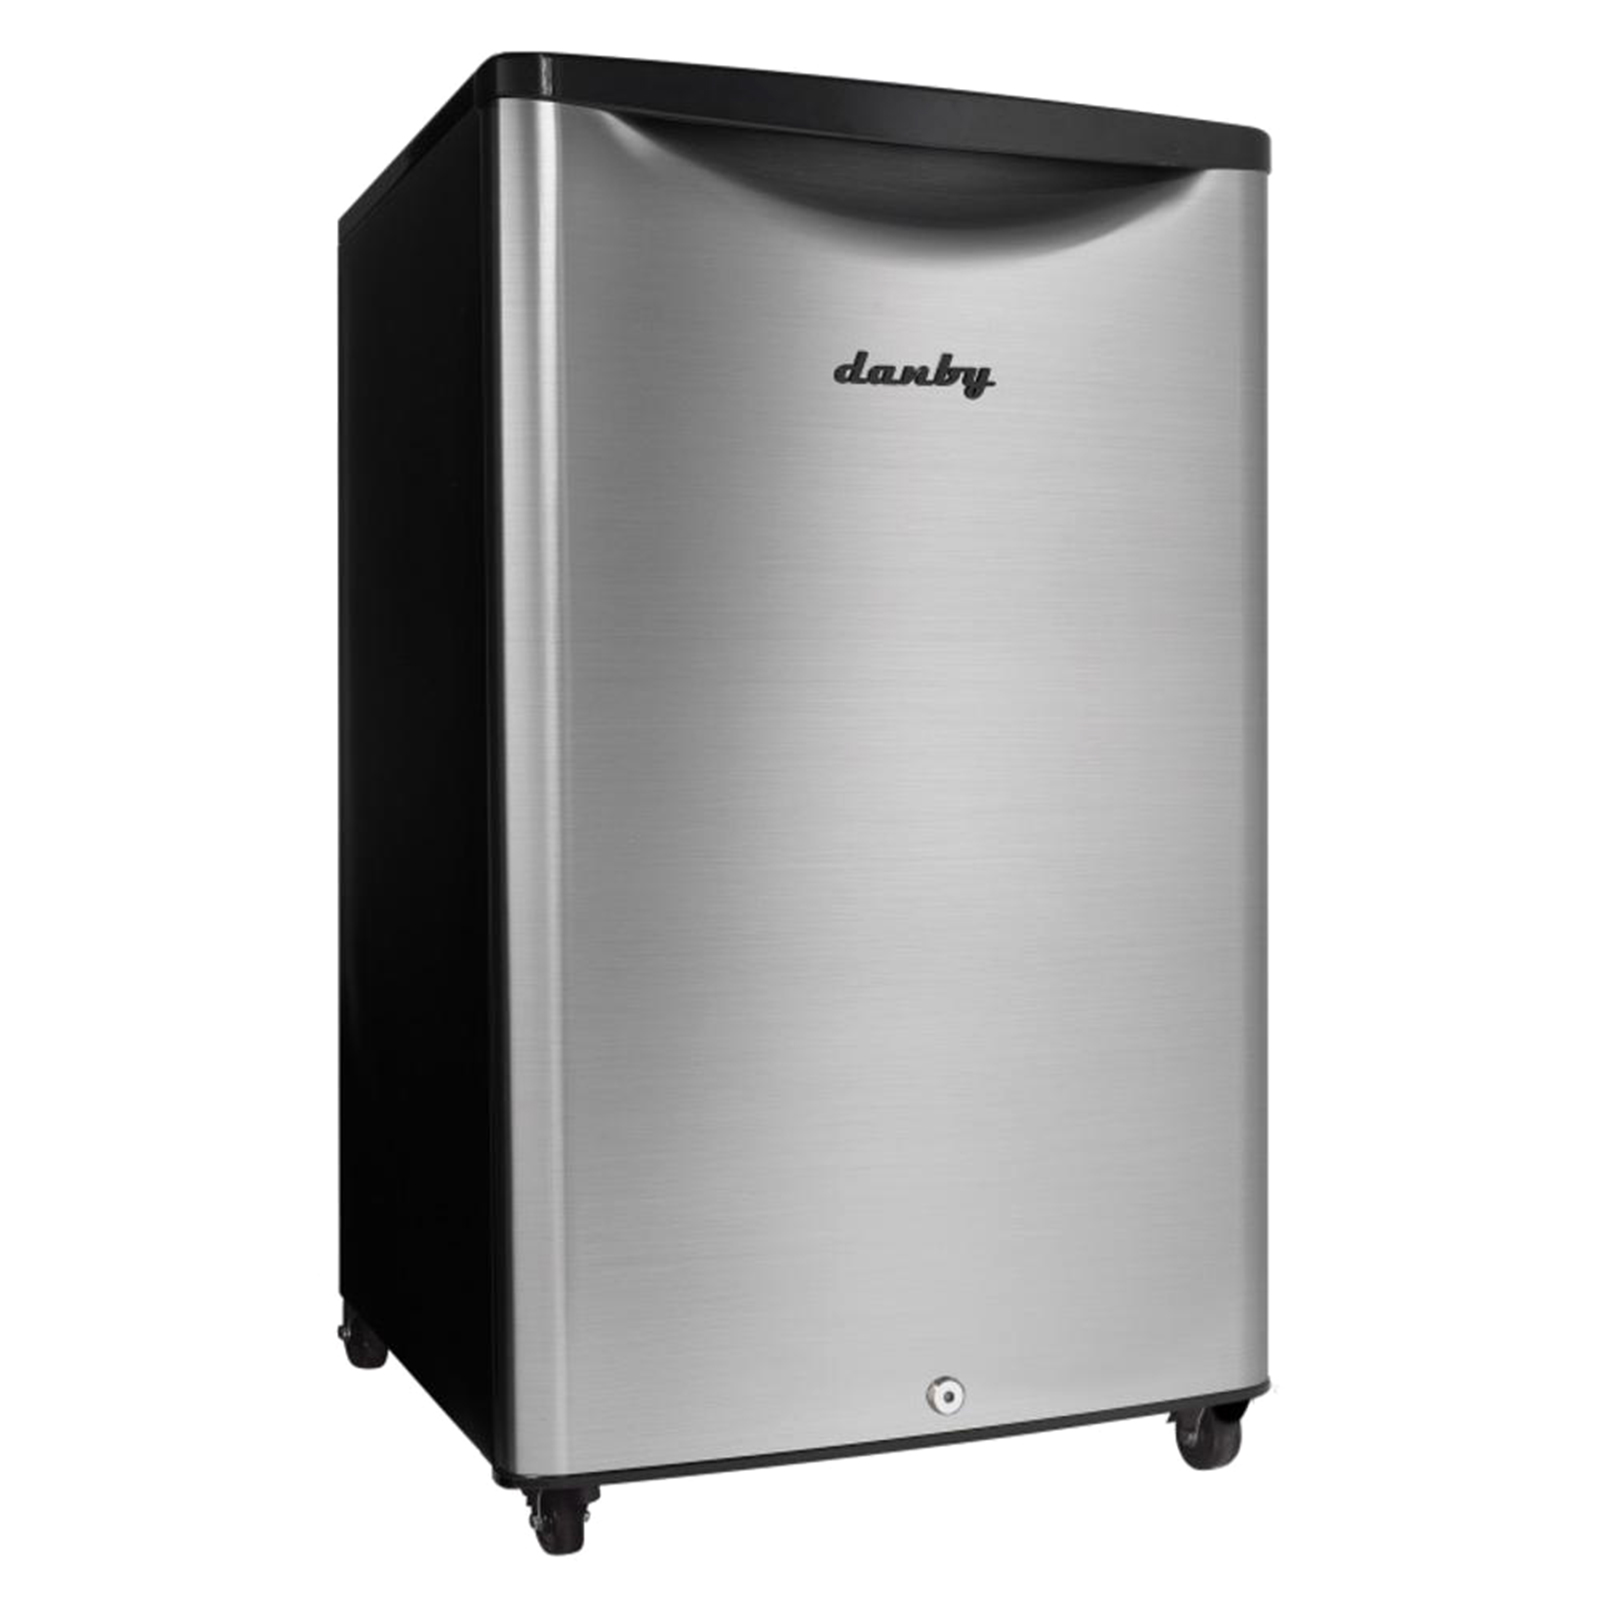 Danby DAR044A6BSLDBO 4.4cu.ft. Outdoor Compact Refrigerator - Stainless Steel